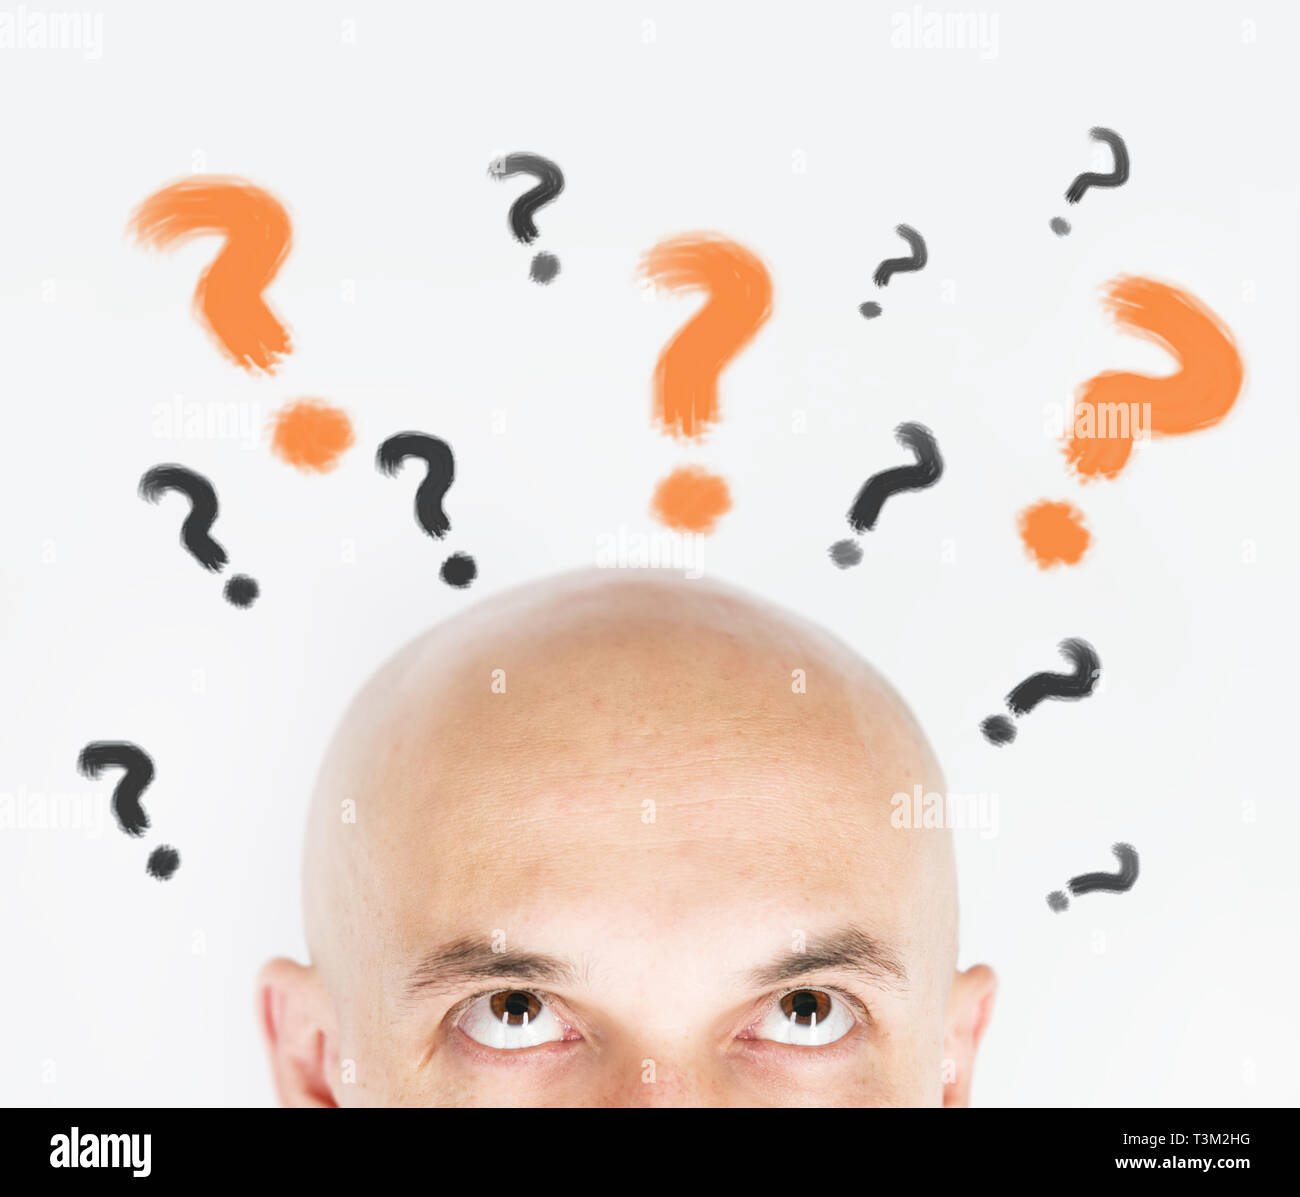 man thinking with question marks Stock Photo